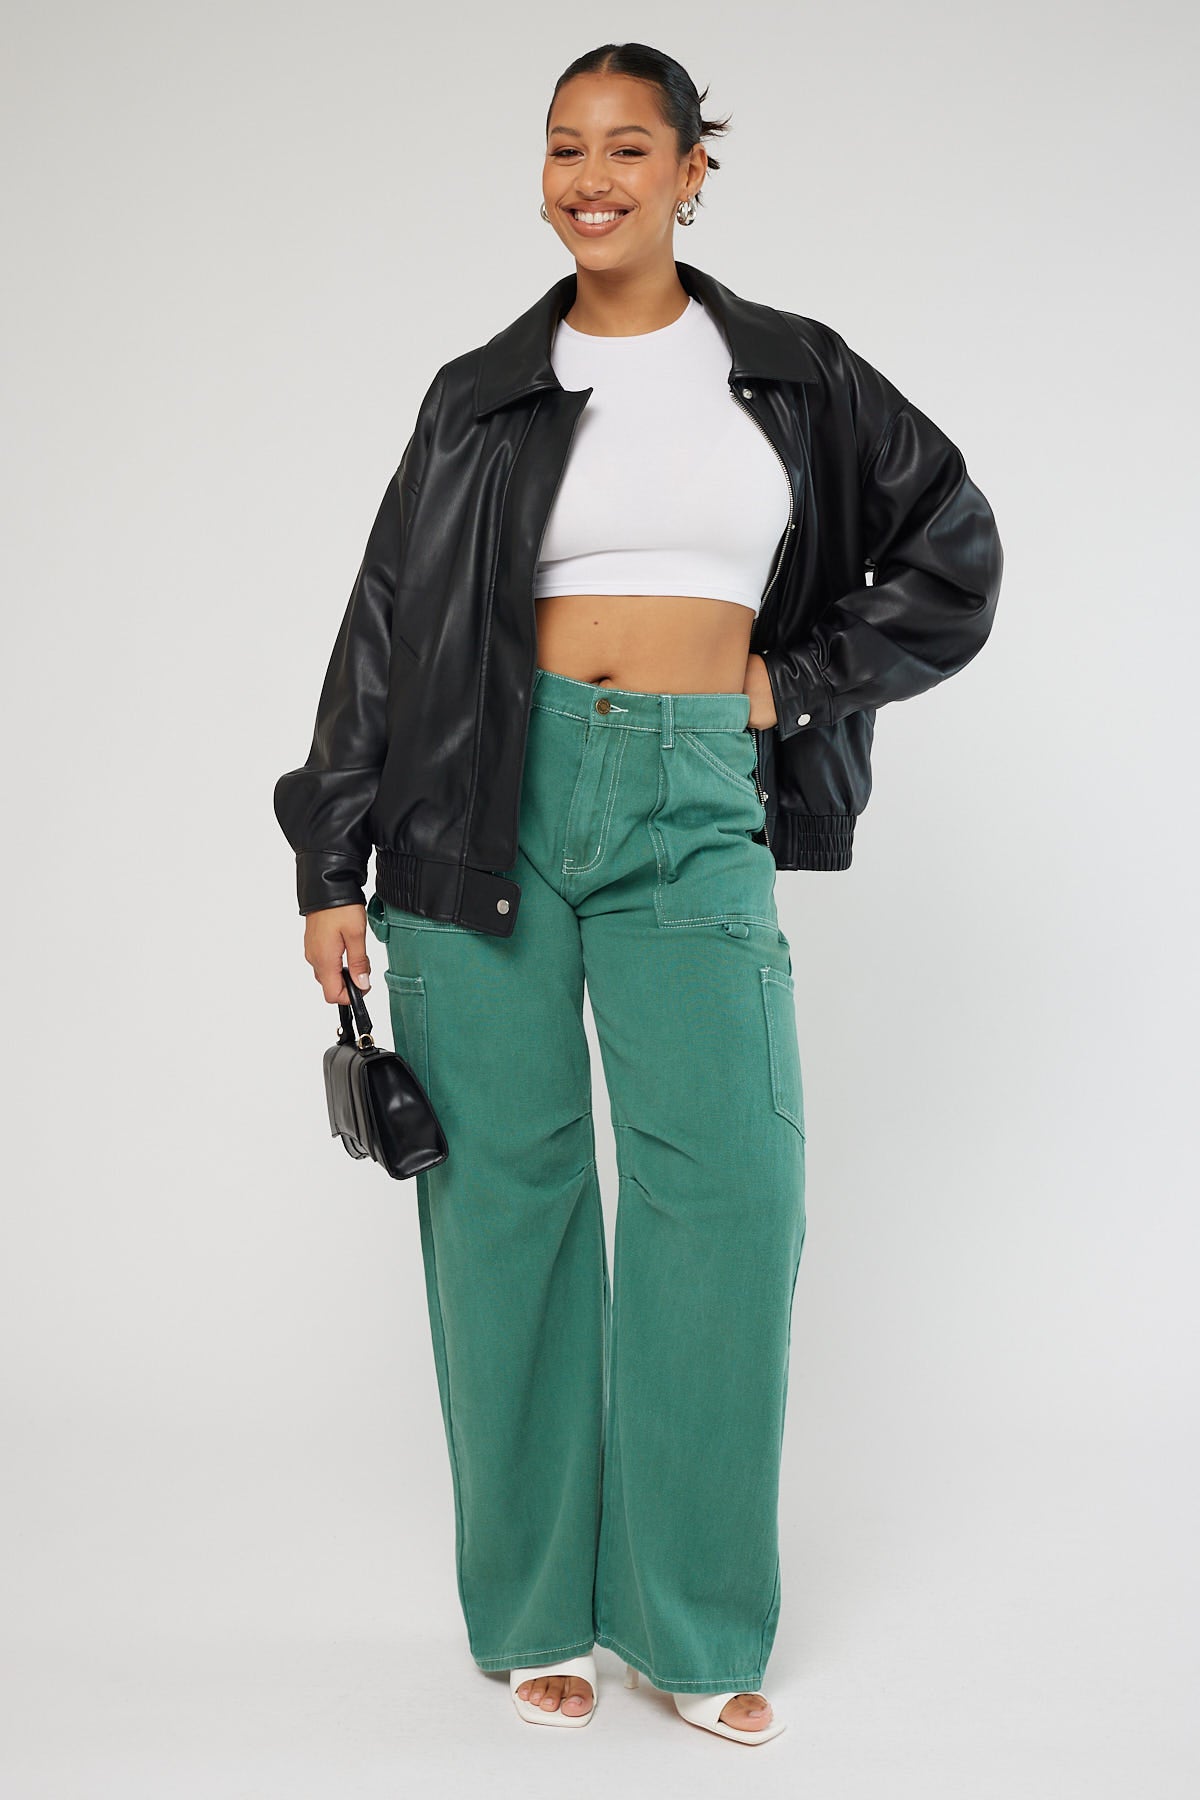 Lioness Miami Vice Pant Green